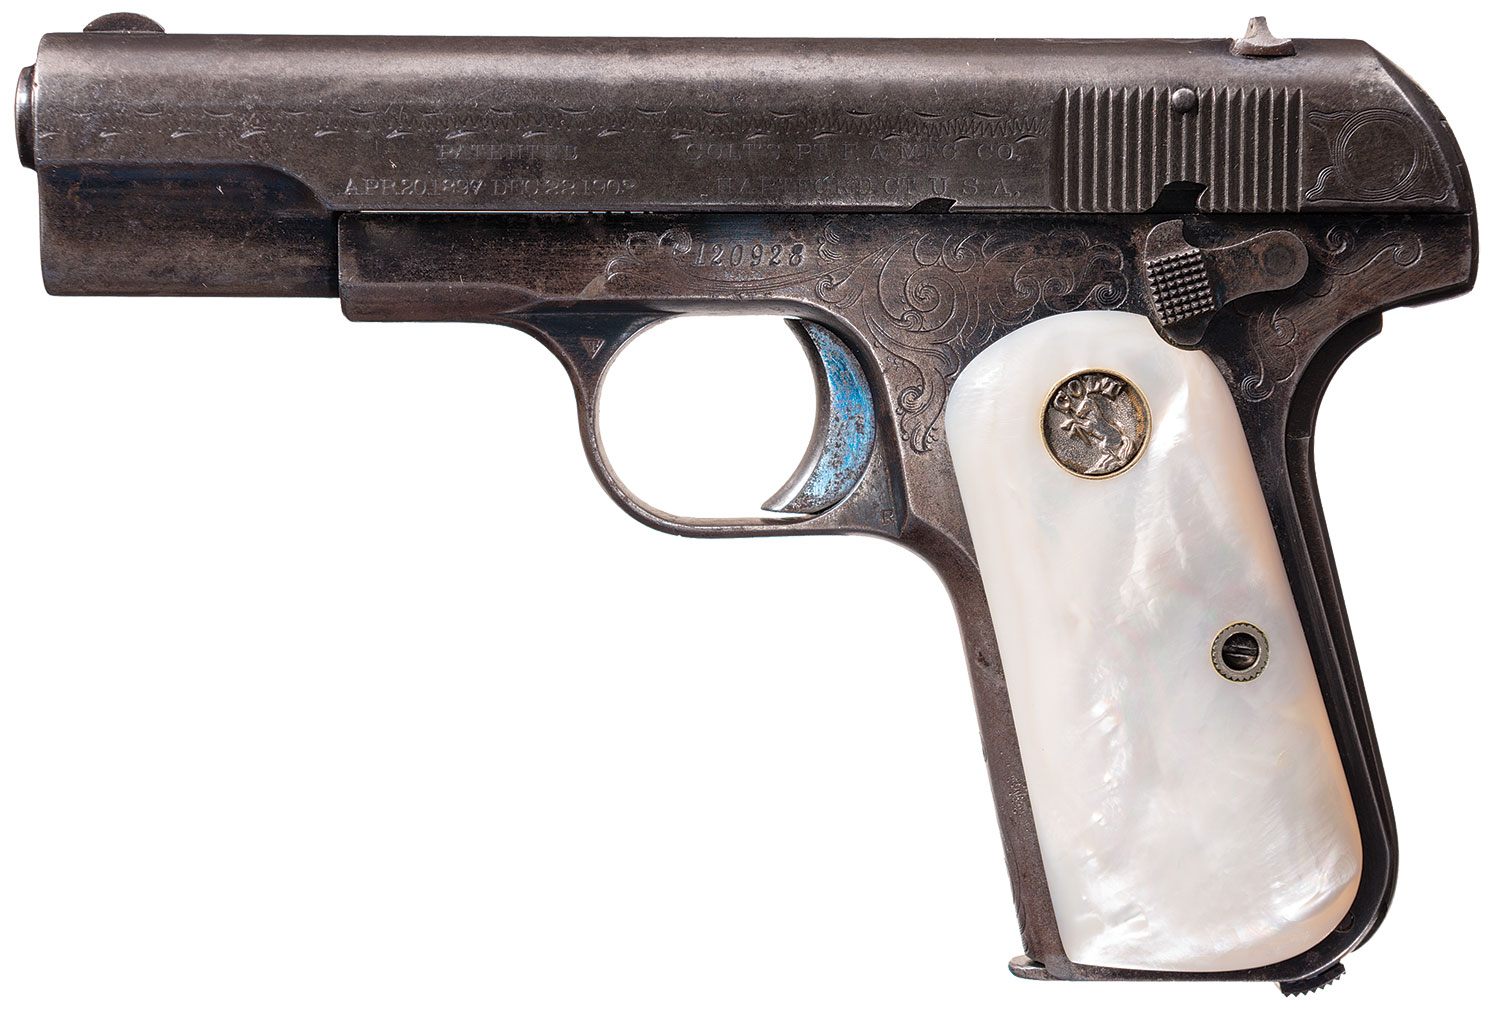 Lot 1454: Documented Factory Engraved Colt Model 1903 Pocket Hammerless Semi-Automatic Pistol with Letter